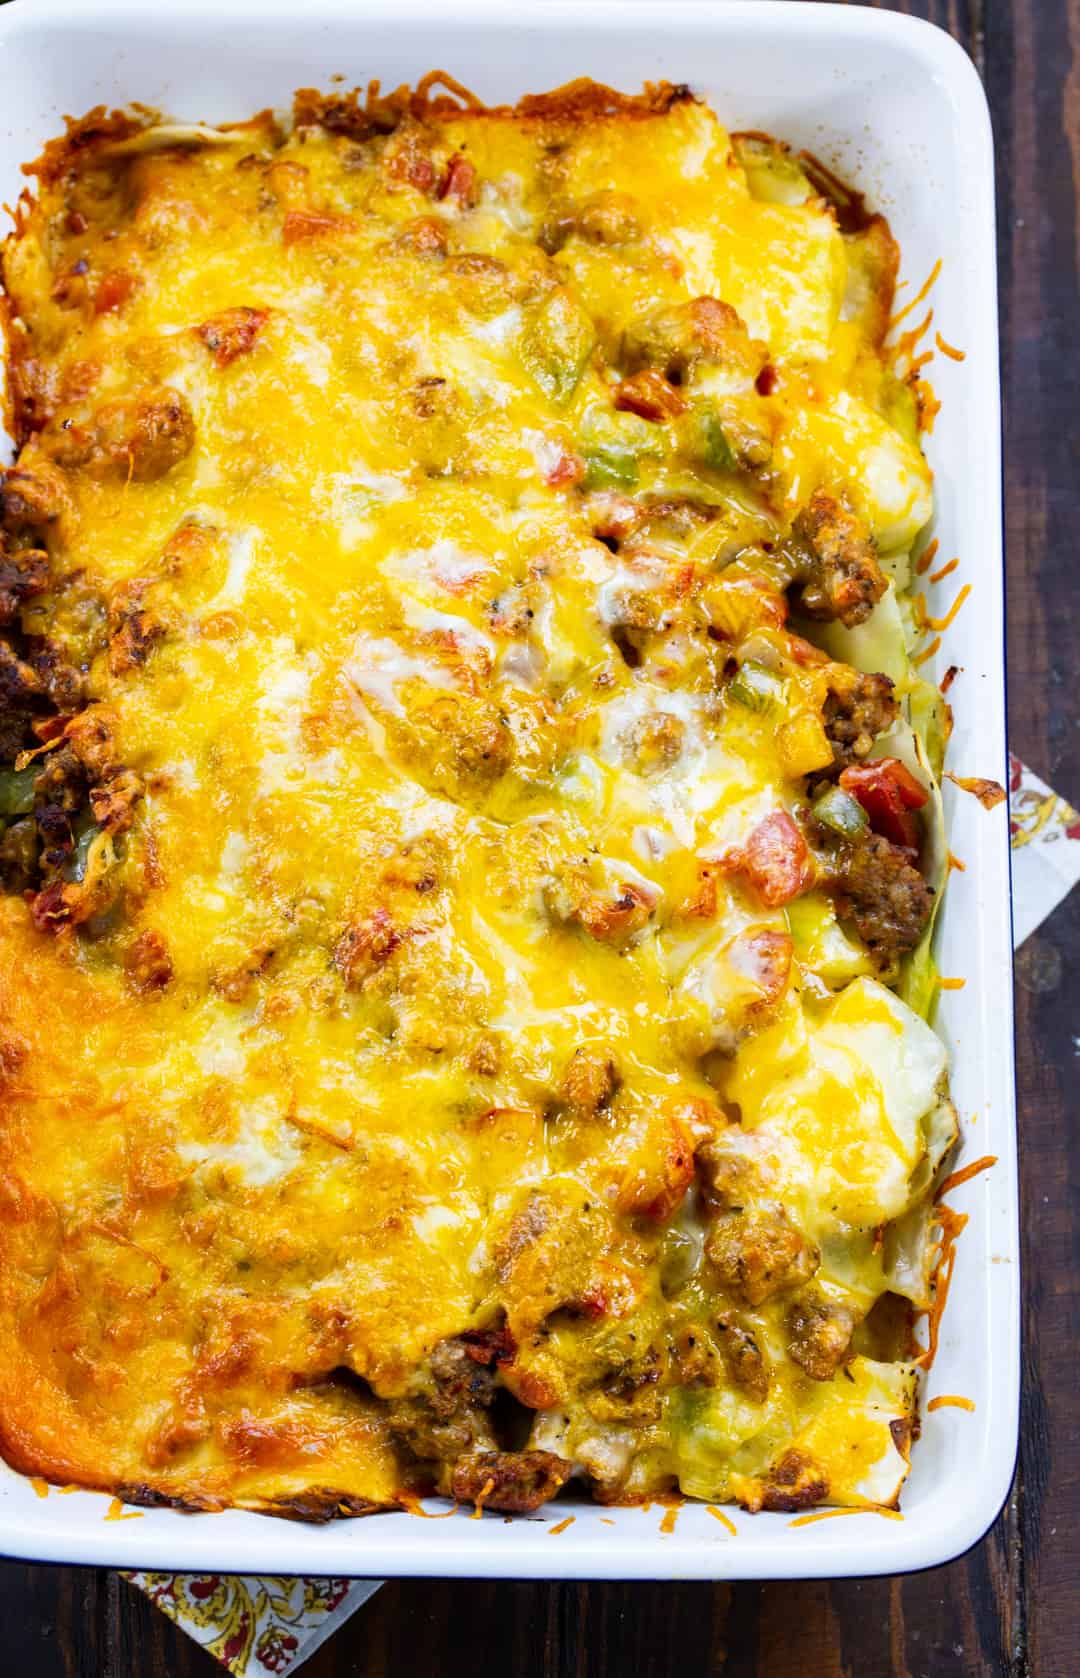 Sausage Cabbage Casserole in a baking dish.